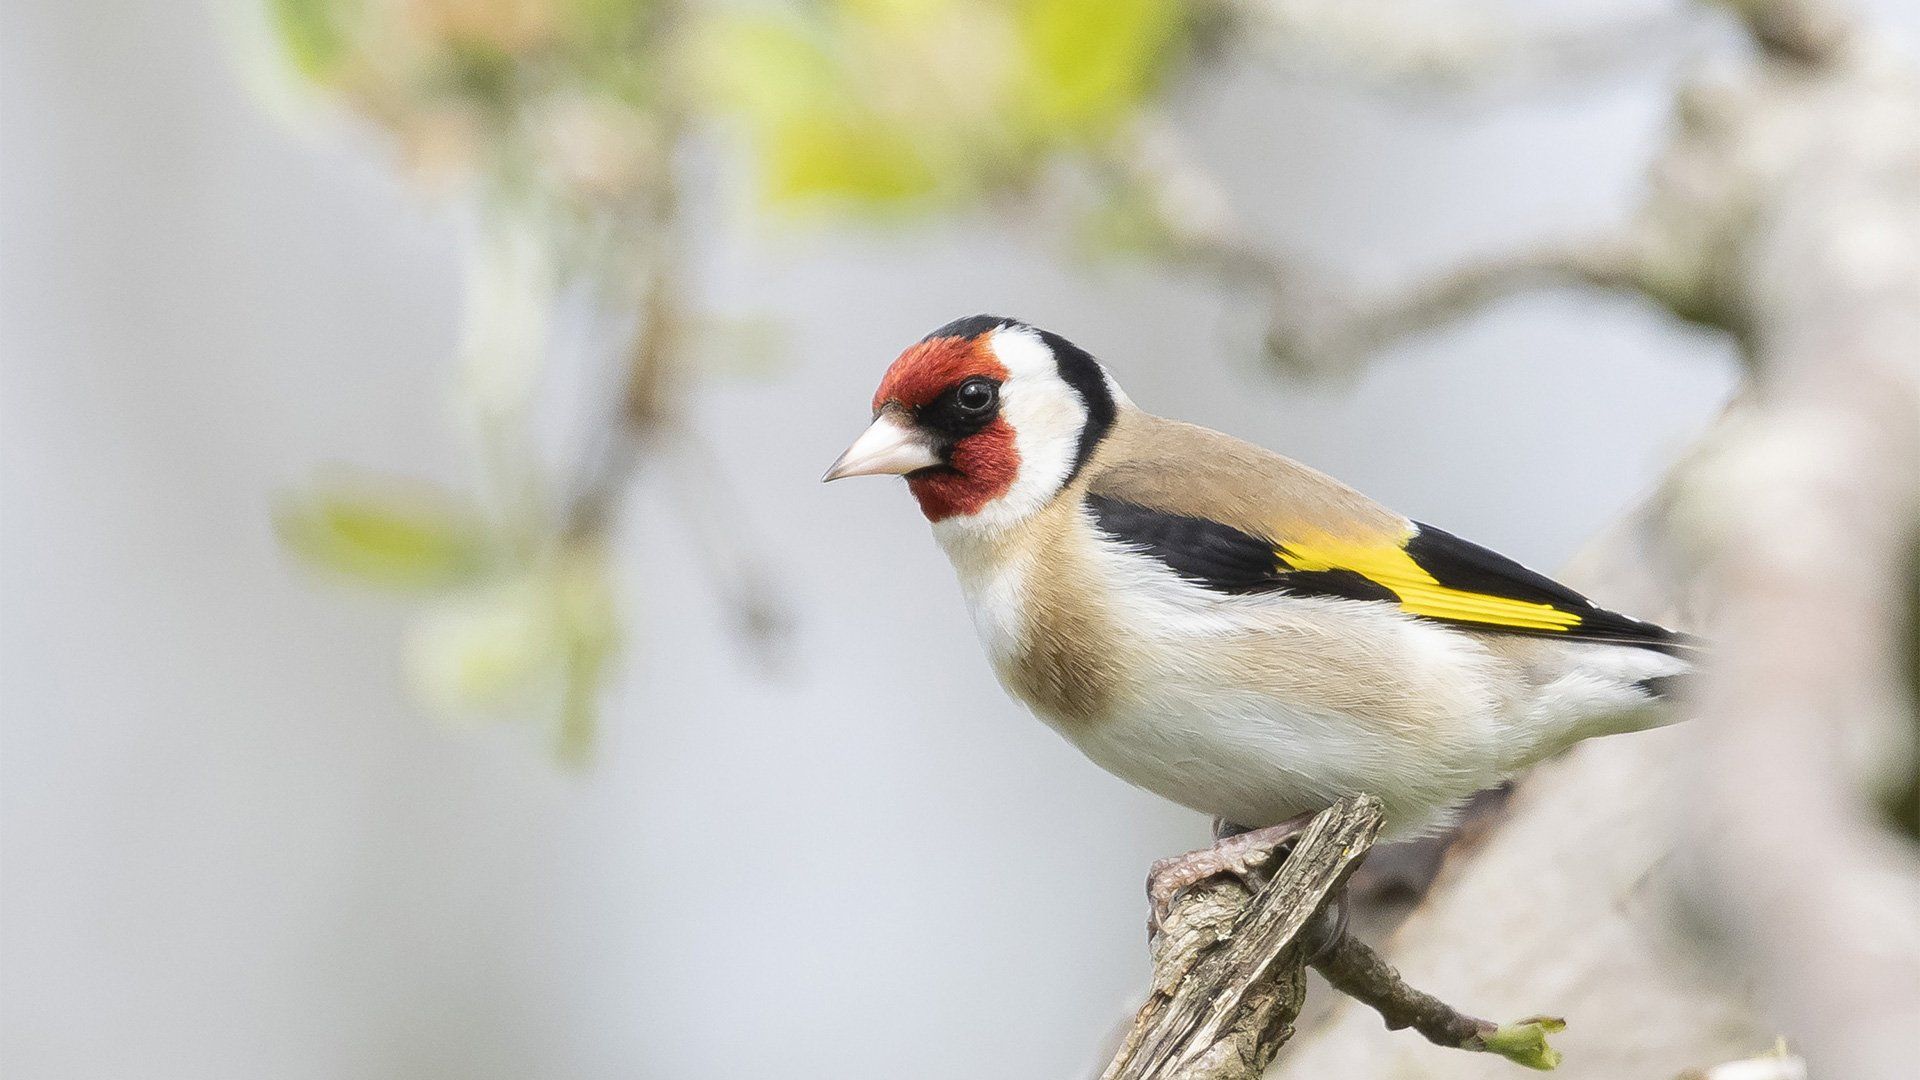 A goldfinch perched on a branch.